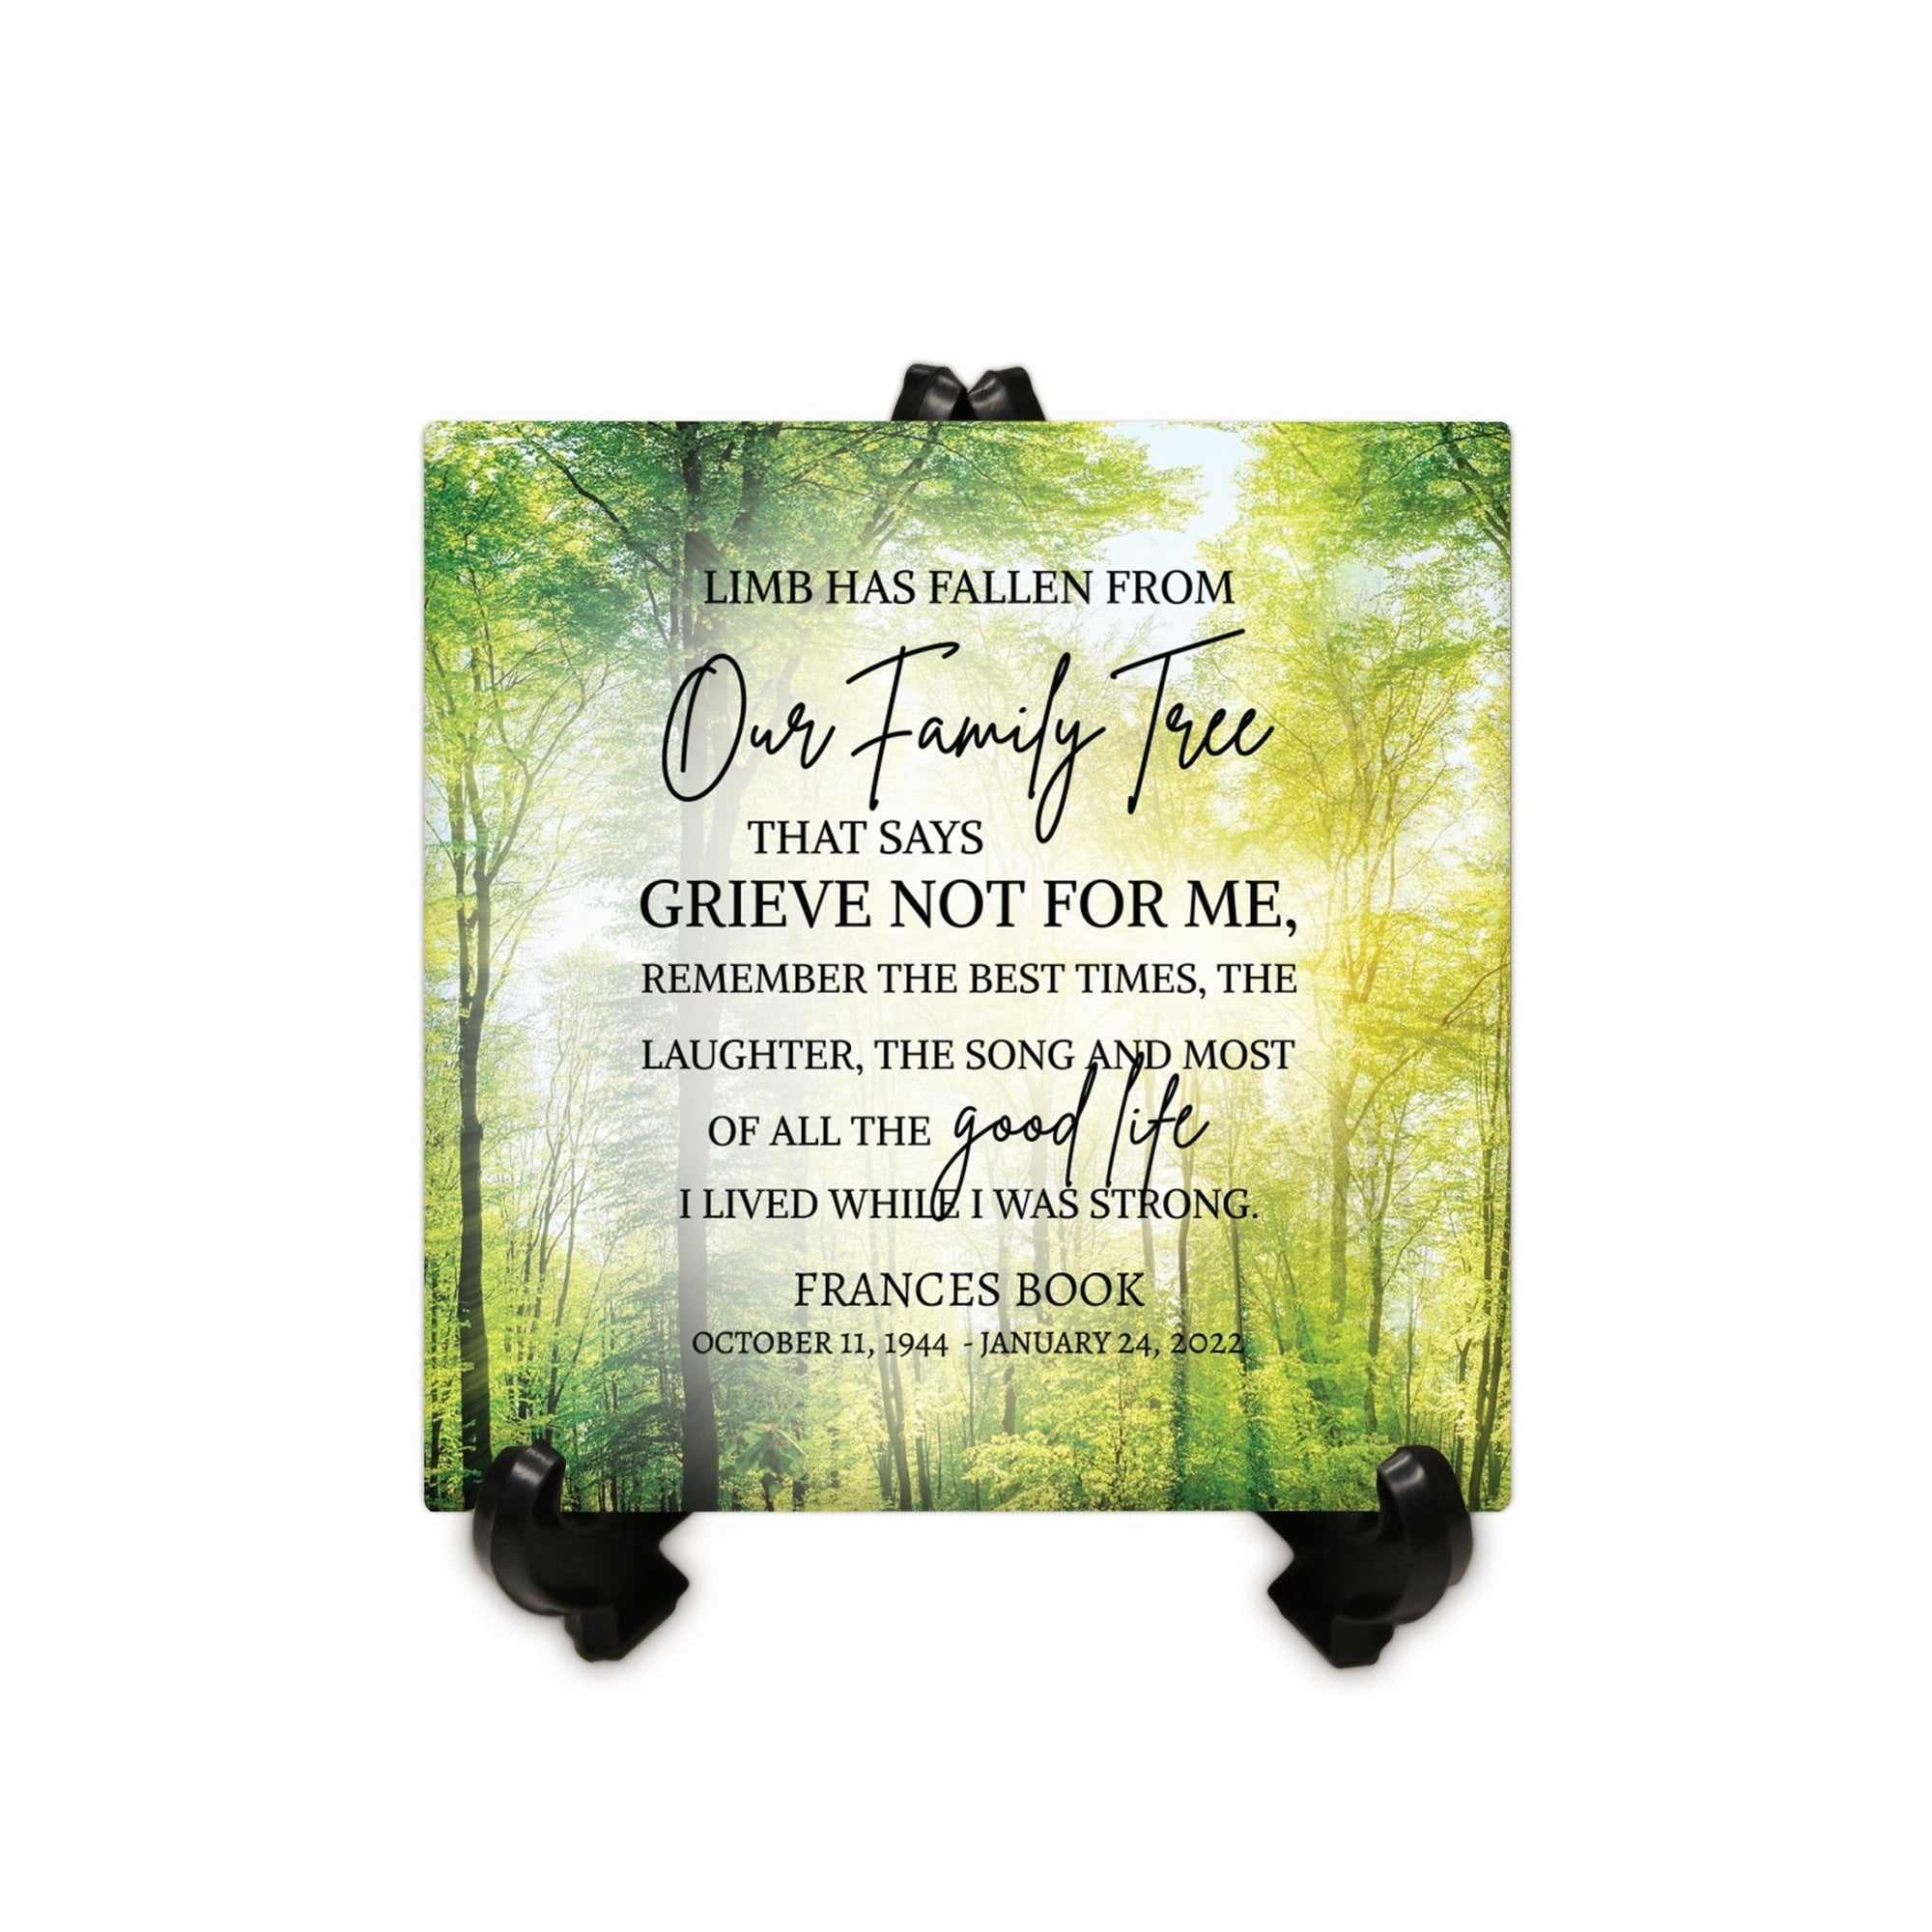 Personalized Memorial Ceramic Trivet with Stand for Home Decor - A Limb Has Fallen - LifeSong Milestones